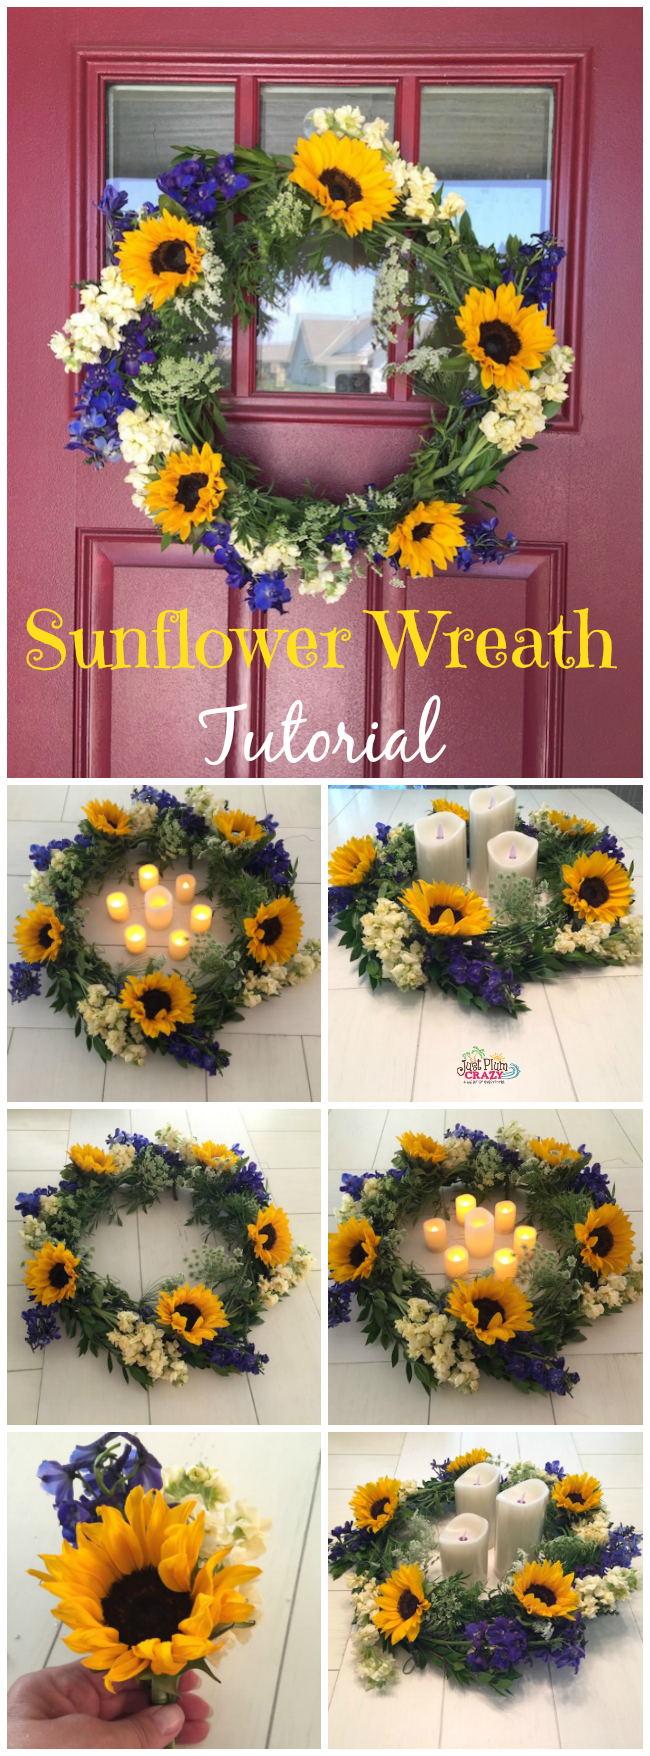 FiftyFlowers are wholesale flowers and have every kind of flower you are looking for for your event. I made a Sunflower Wreath and wedding corsage.